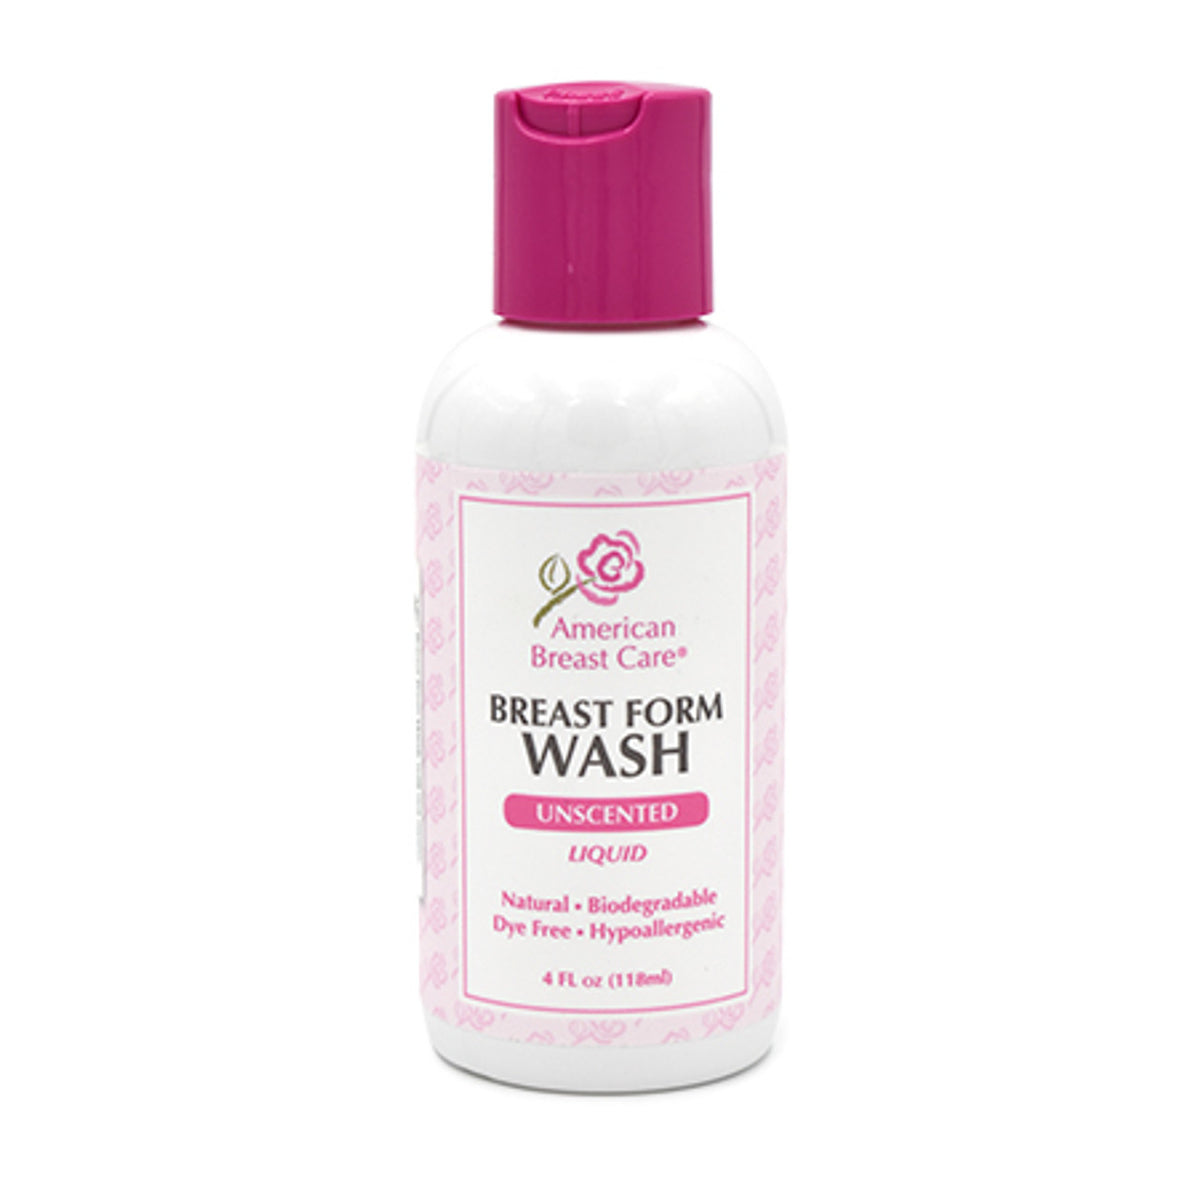 ABC BREAST FORM WASH UNSCENTED